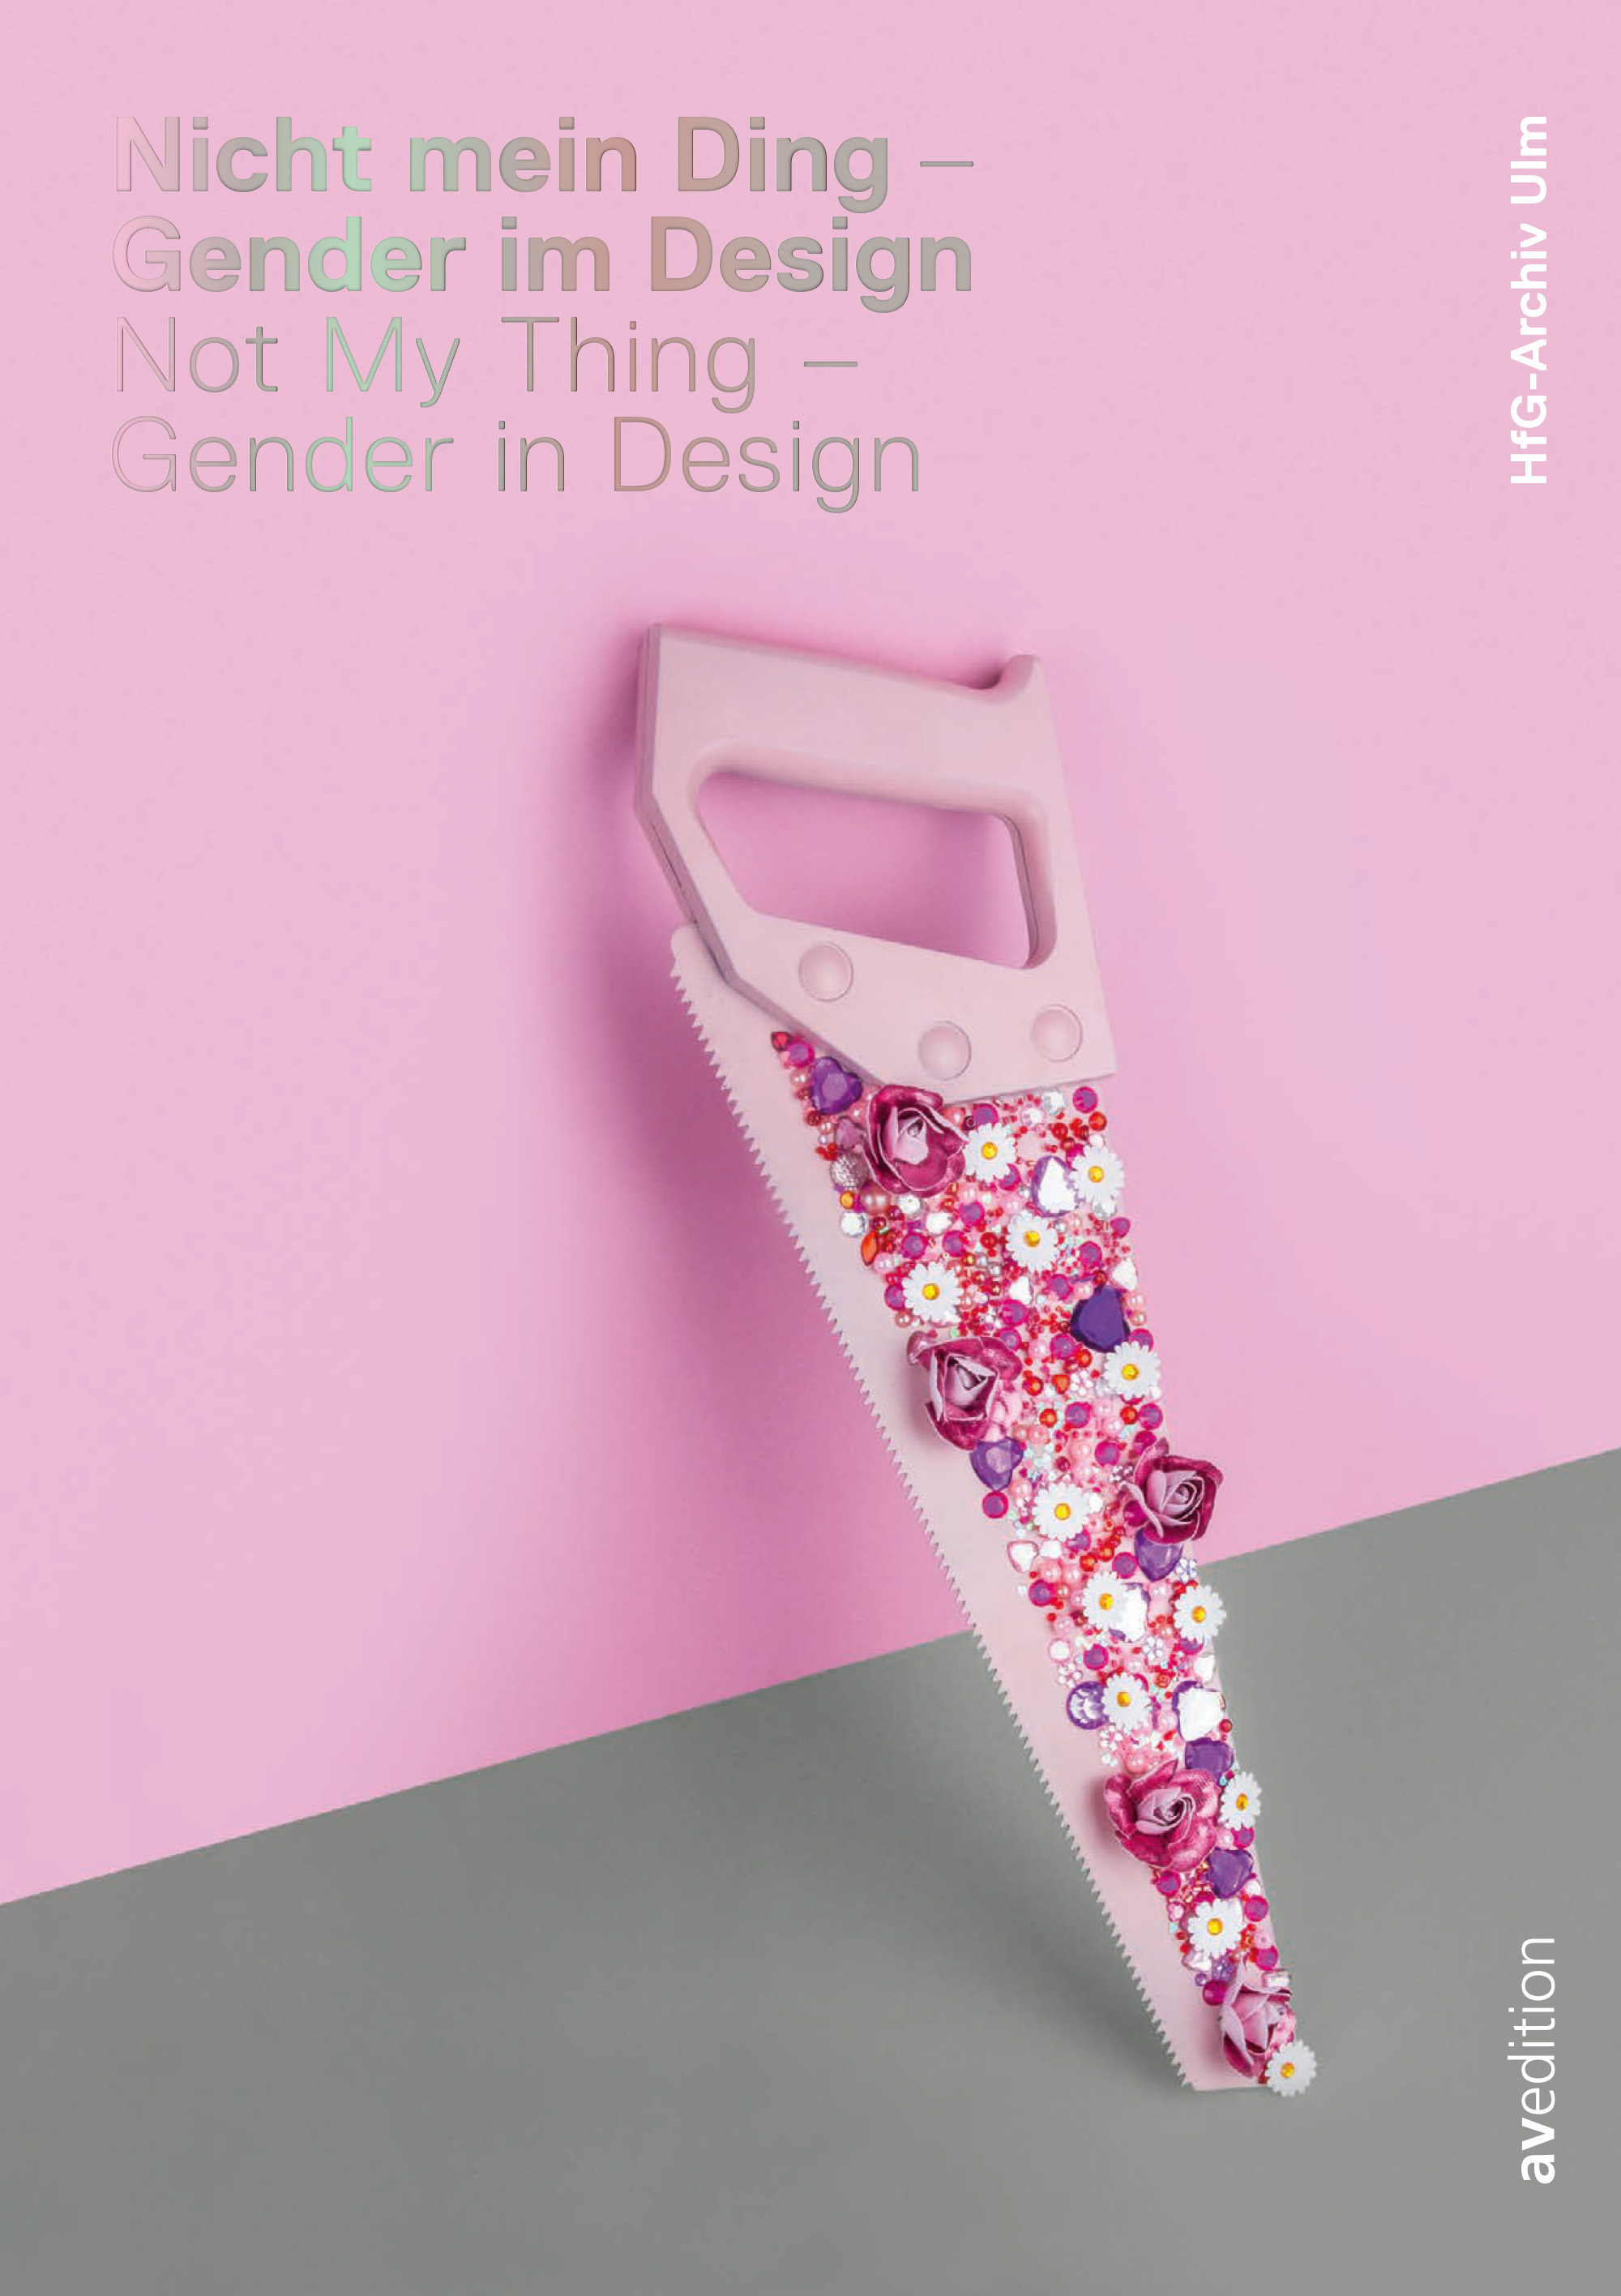 Not My Thing − Gender in Design